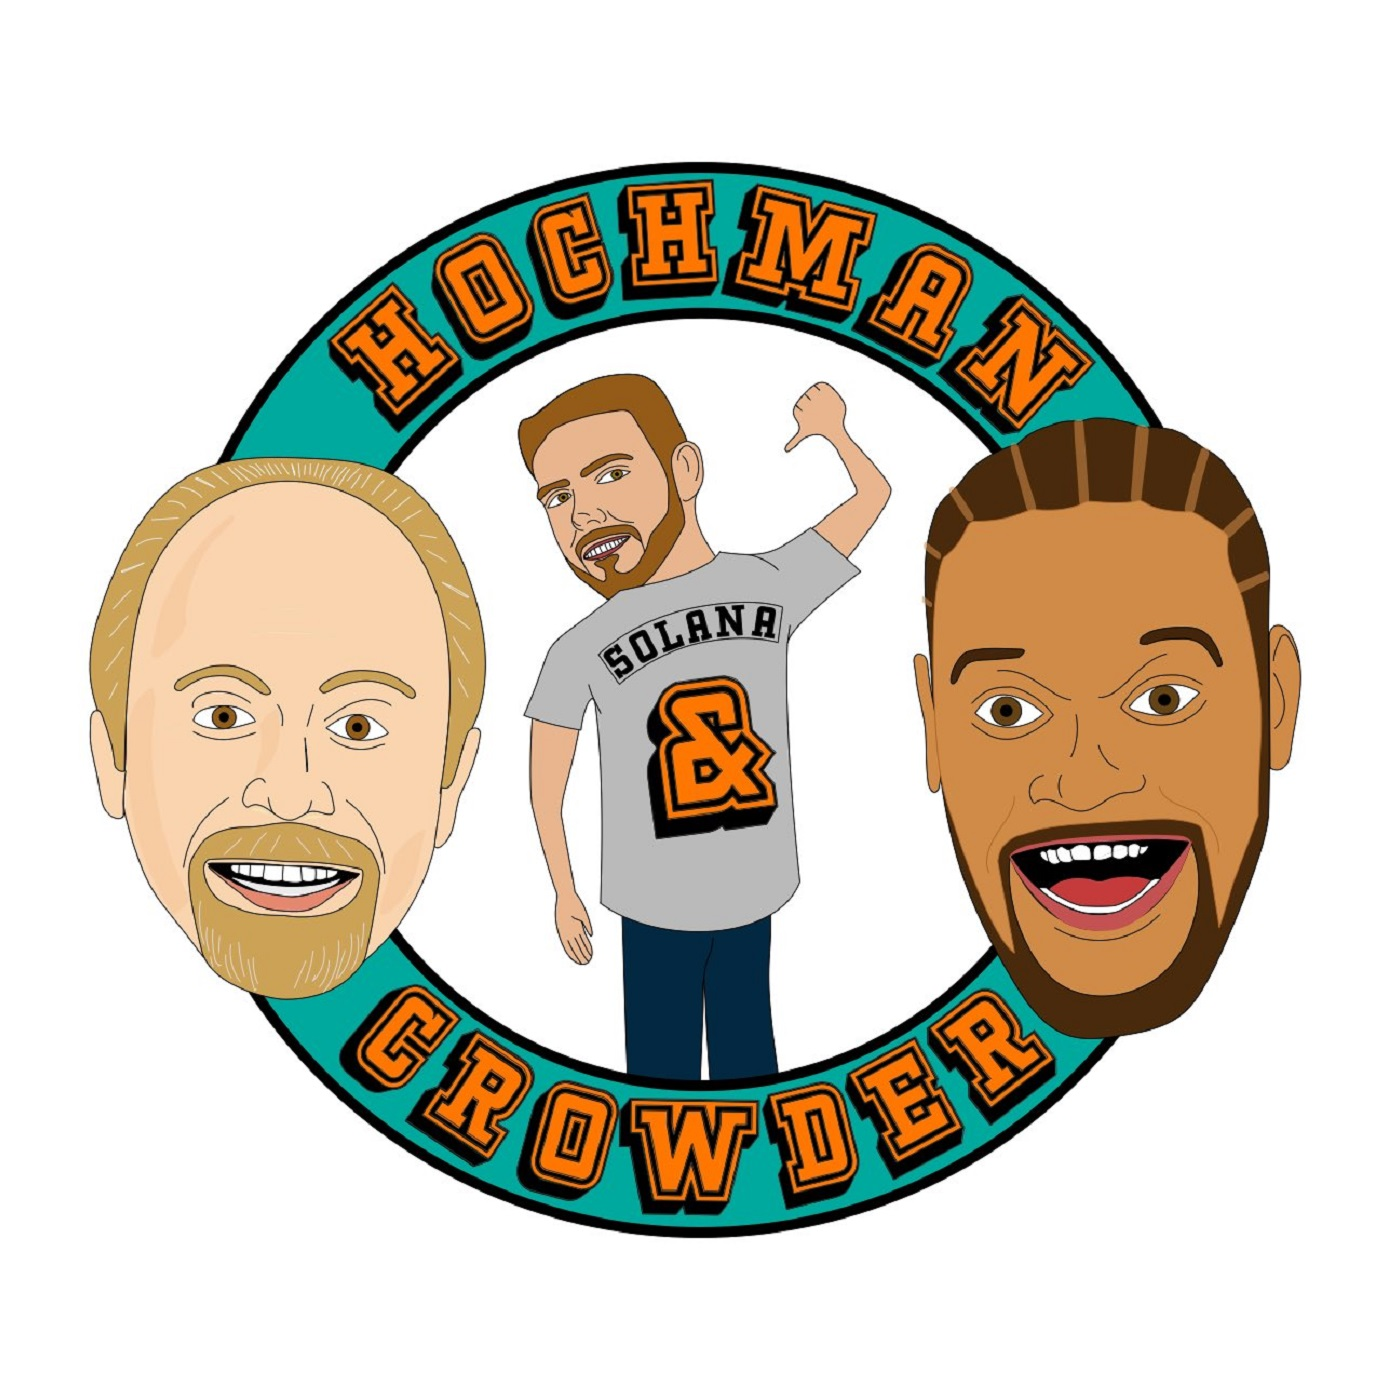 11-05-2019 - Hoch and Crowder Podcast Hour 3